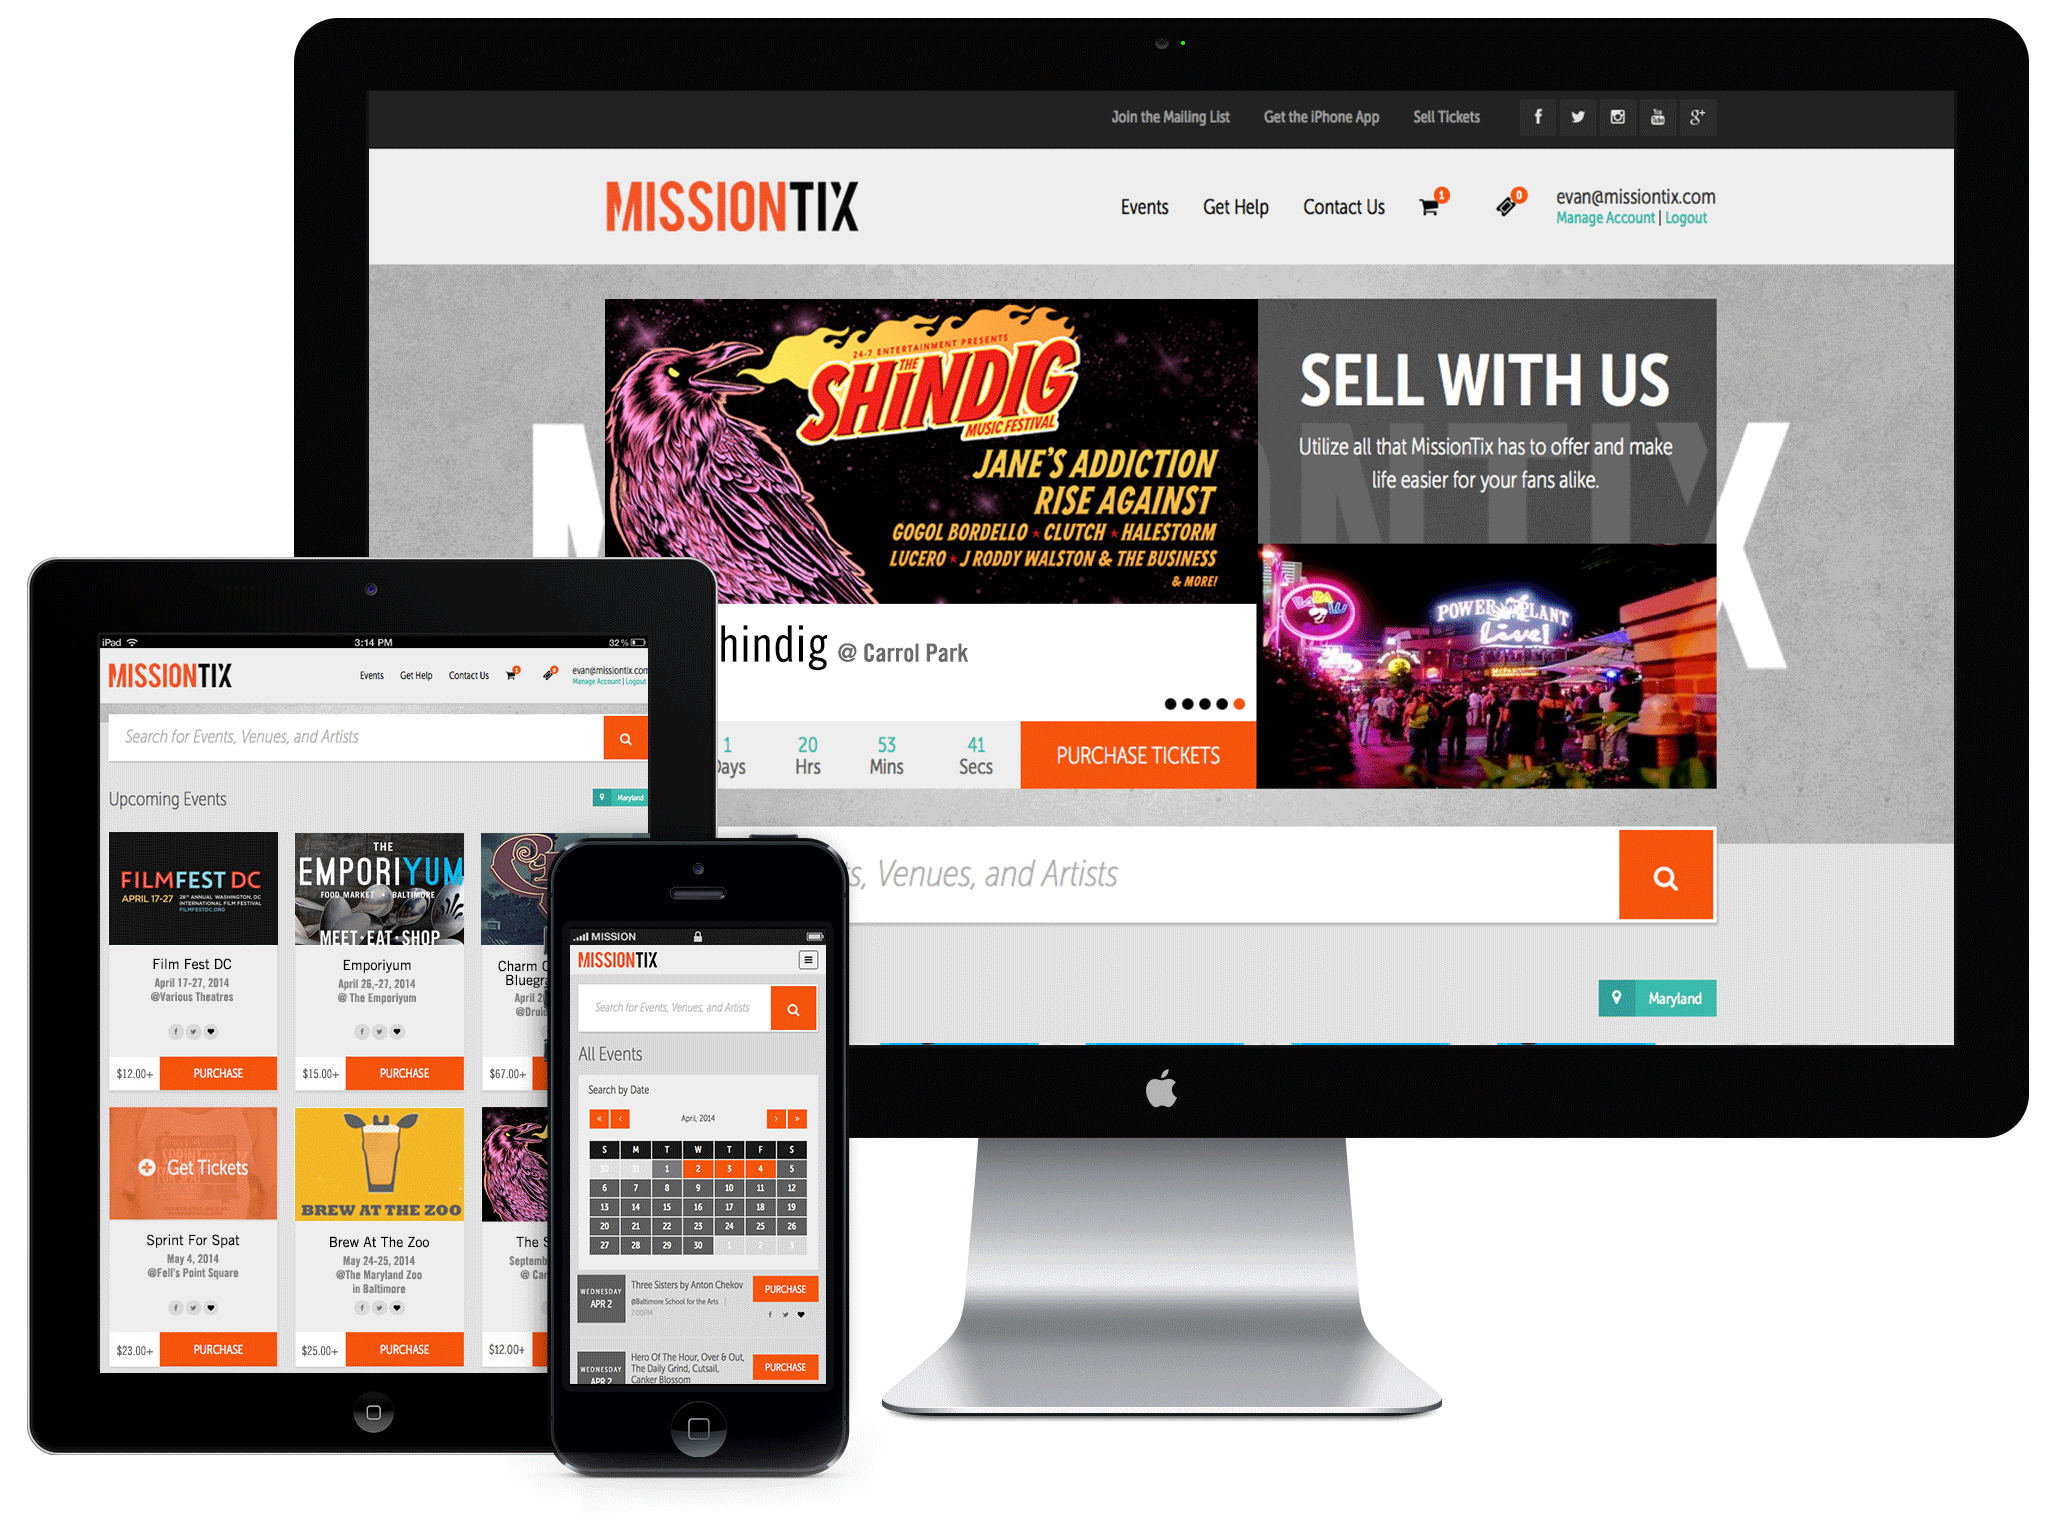 MissionTix provides an online ticketing platform and consumer portal for events, concerts, fundraisers and the like.